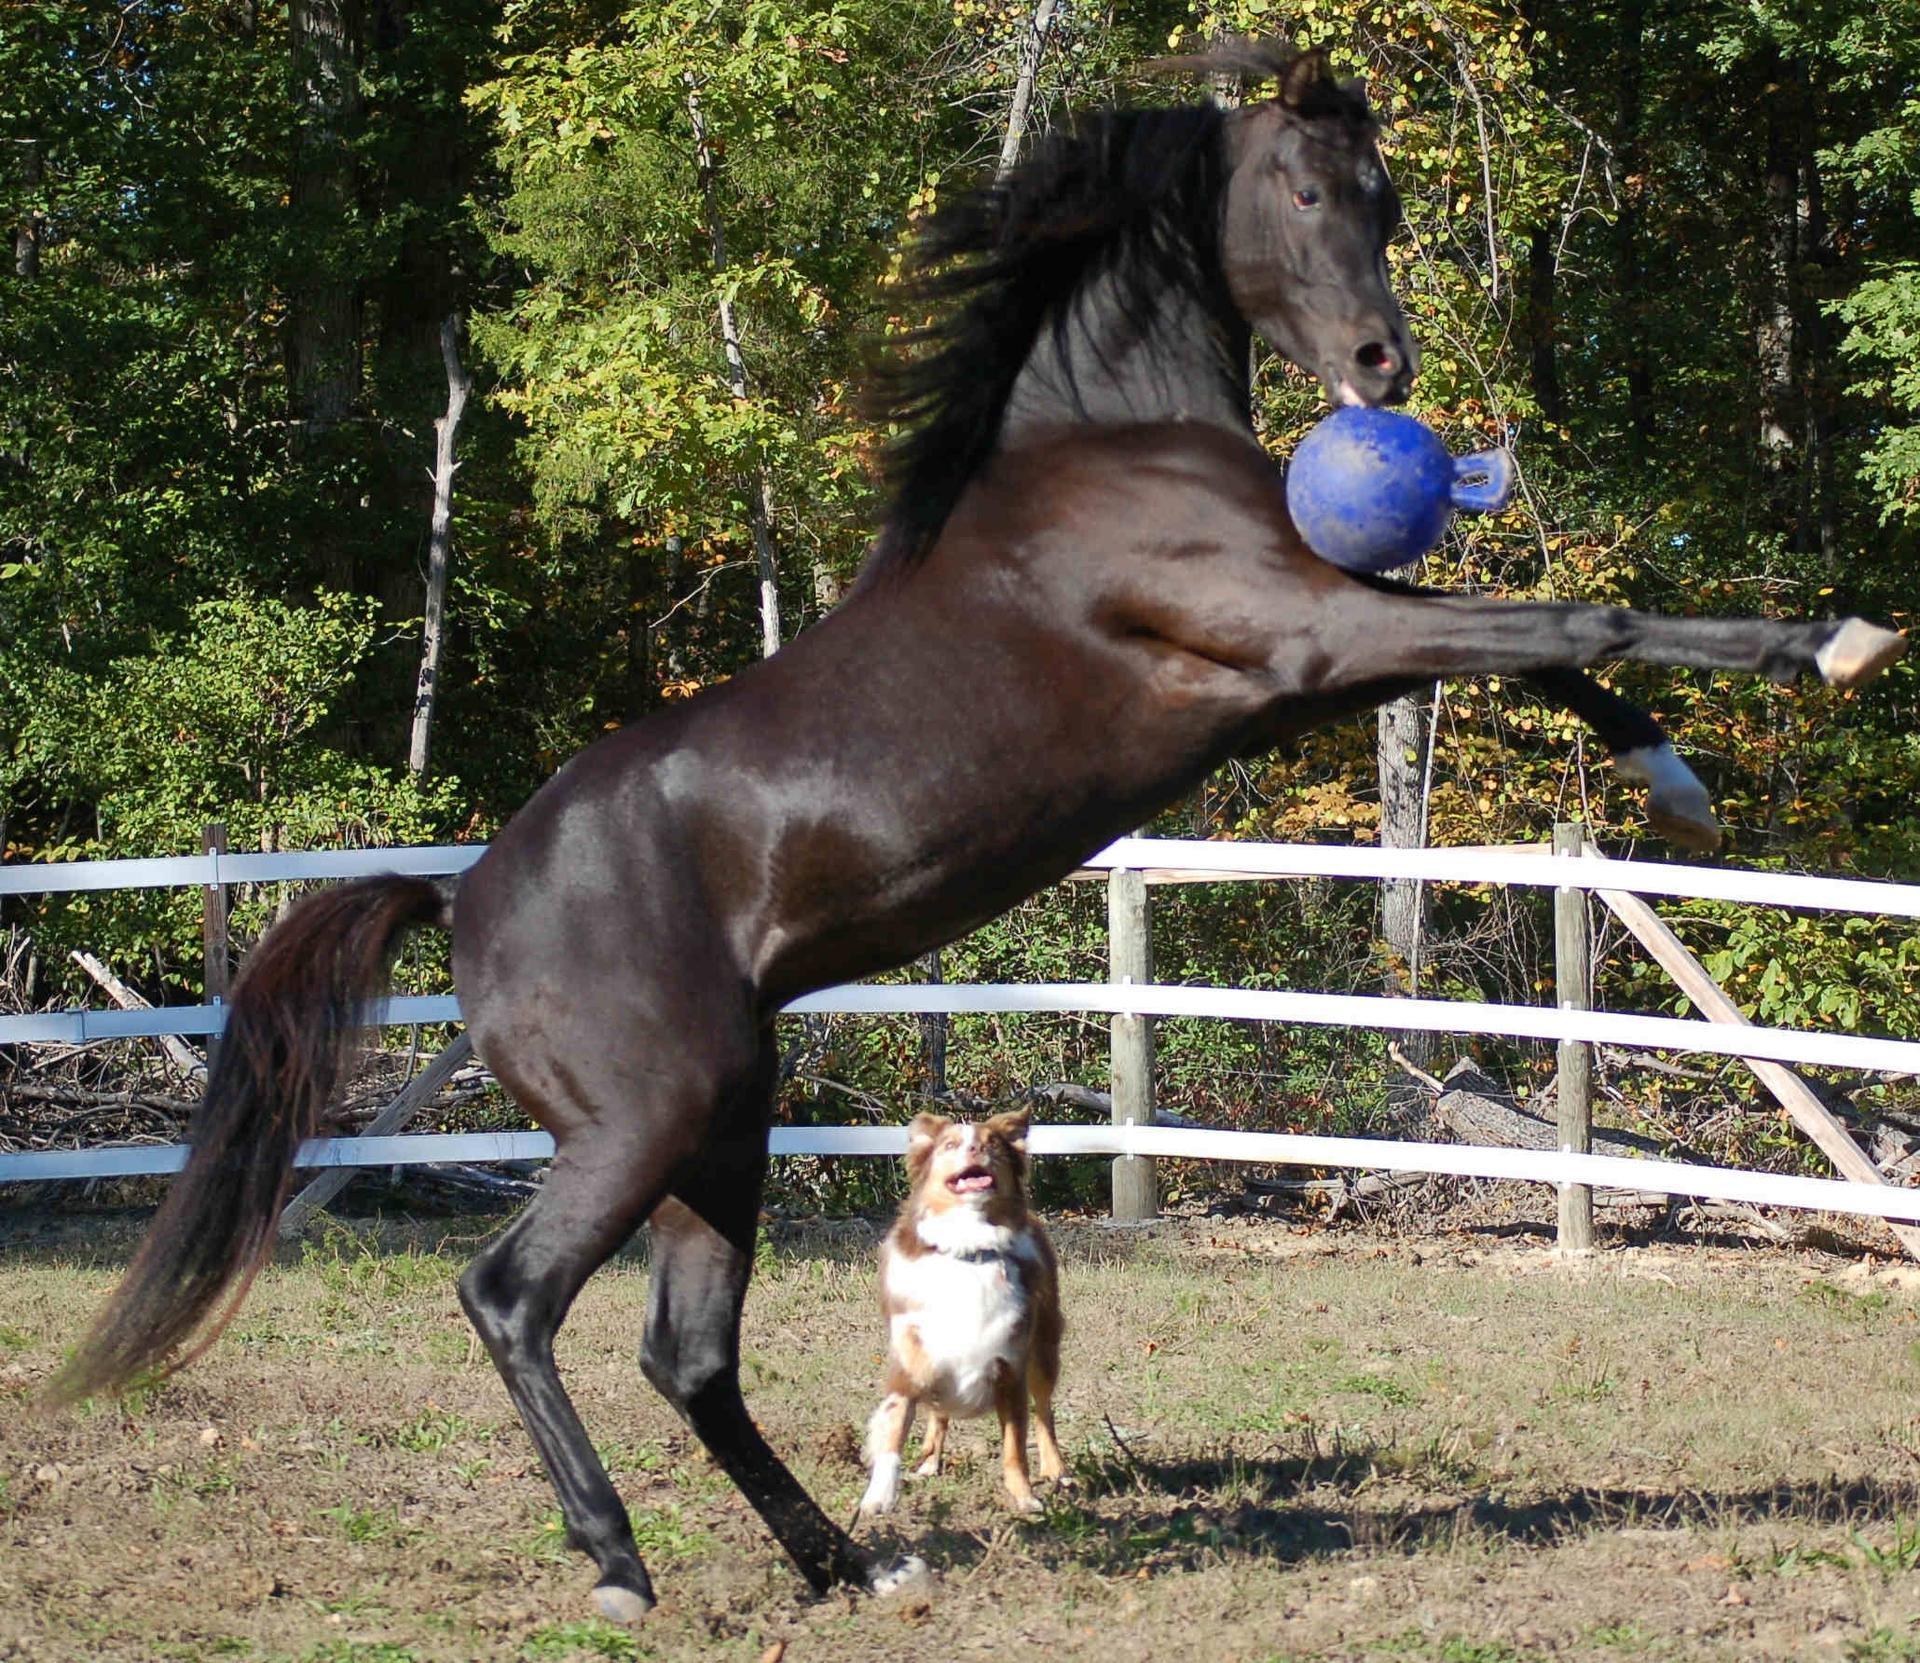 Ball for horse and dog